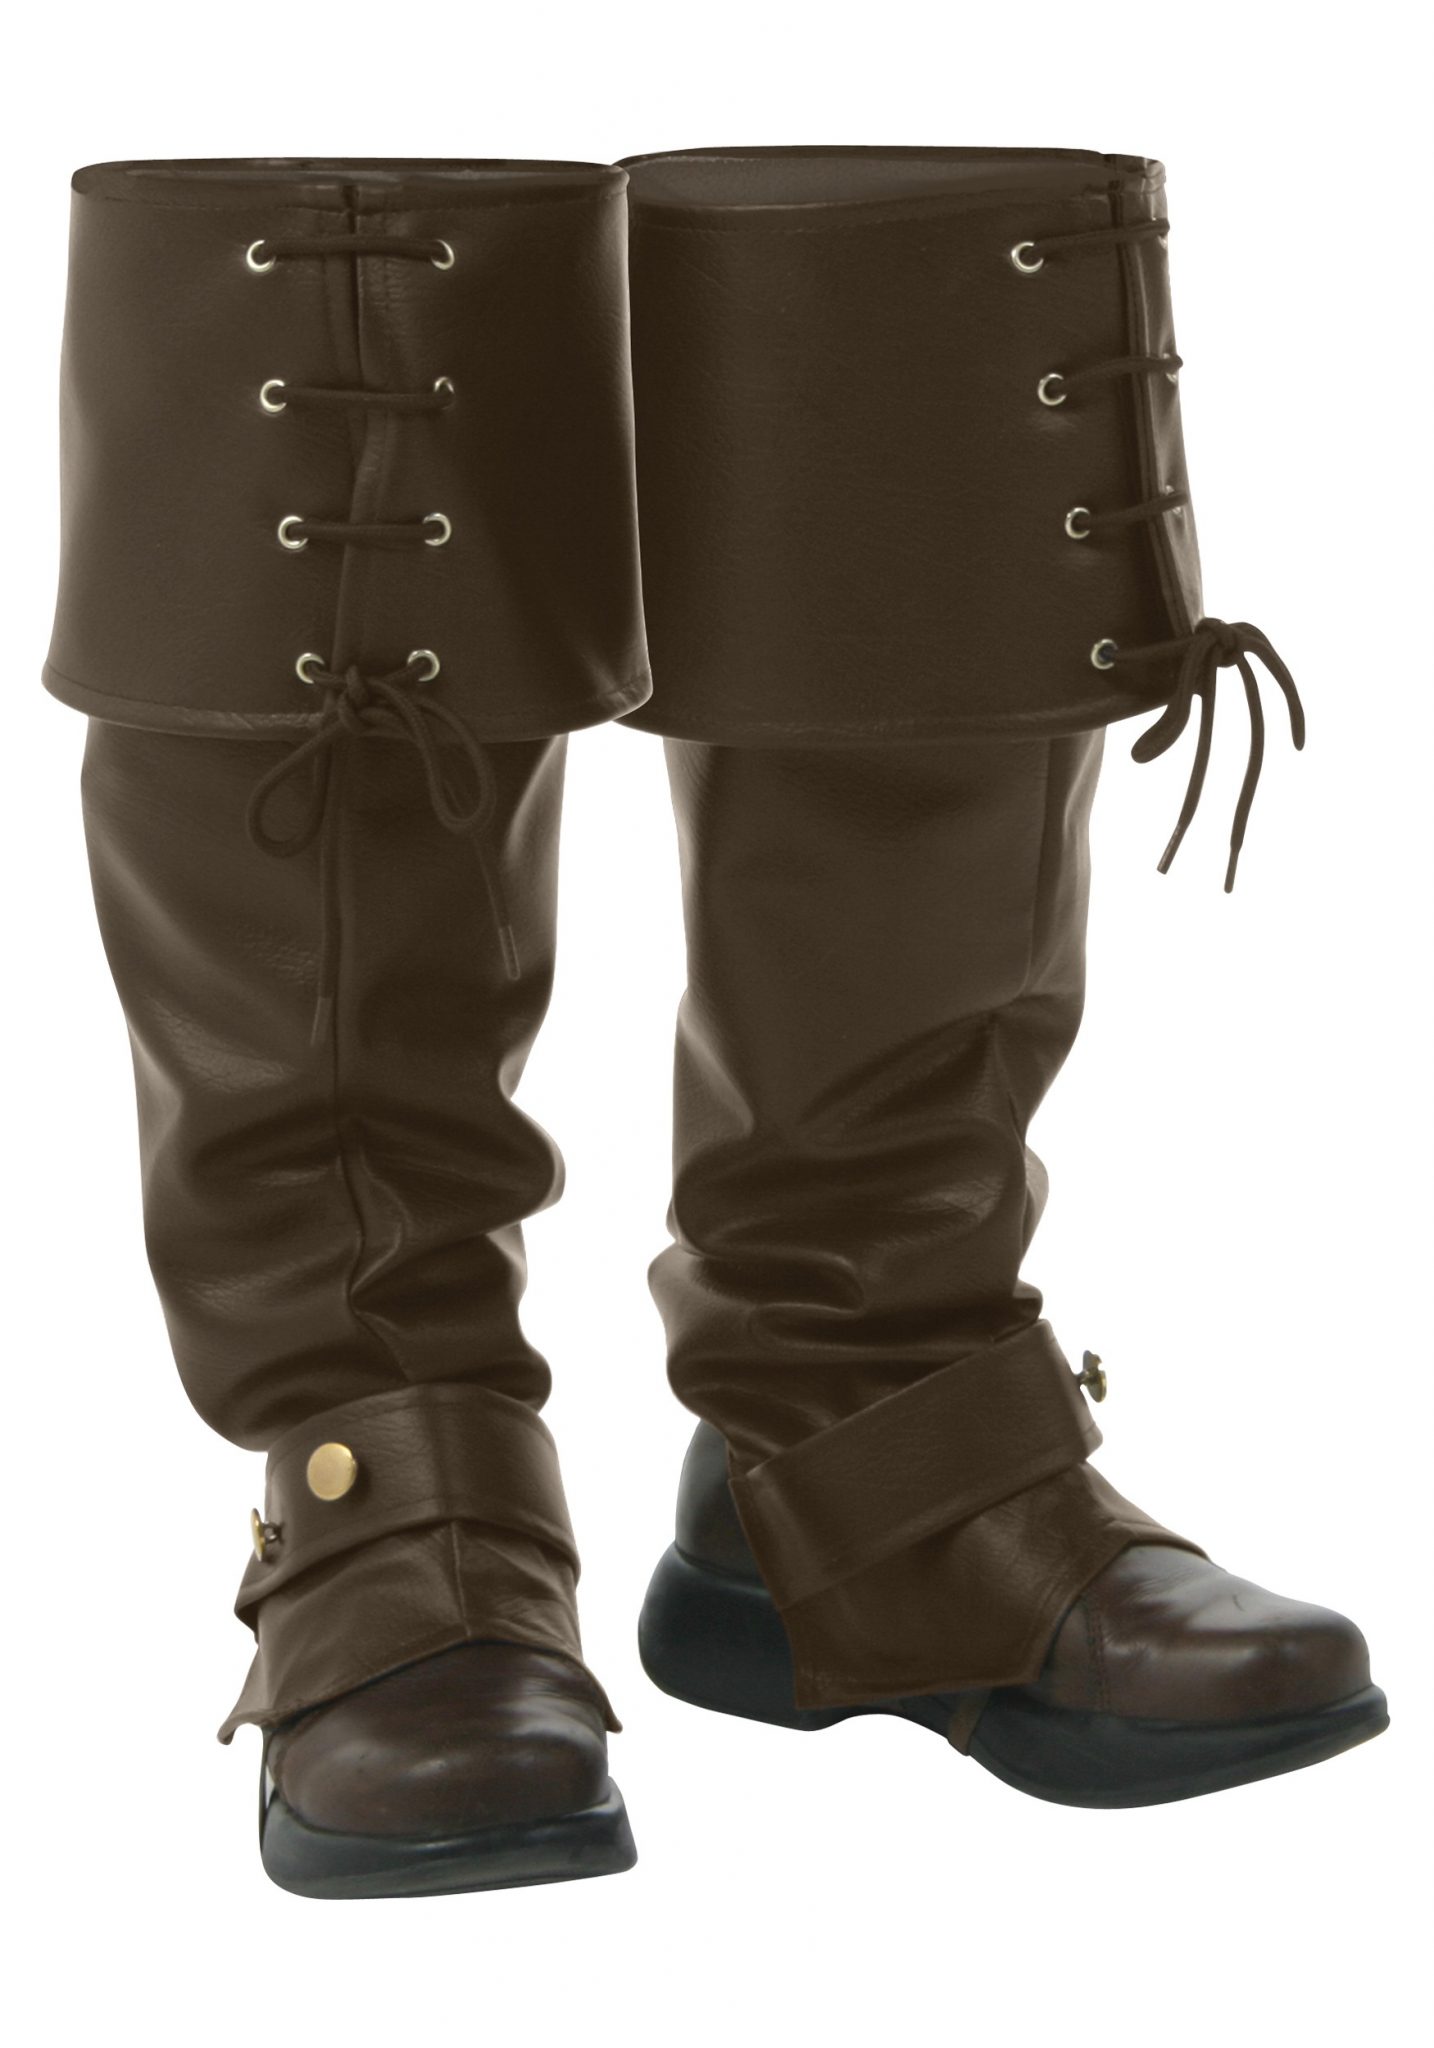 Fun Costumes Deluxe Brown Boot Tops Costumespirate Costumes For Sale Shipping In 24h At Fun 1485